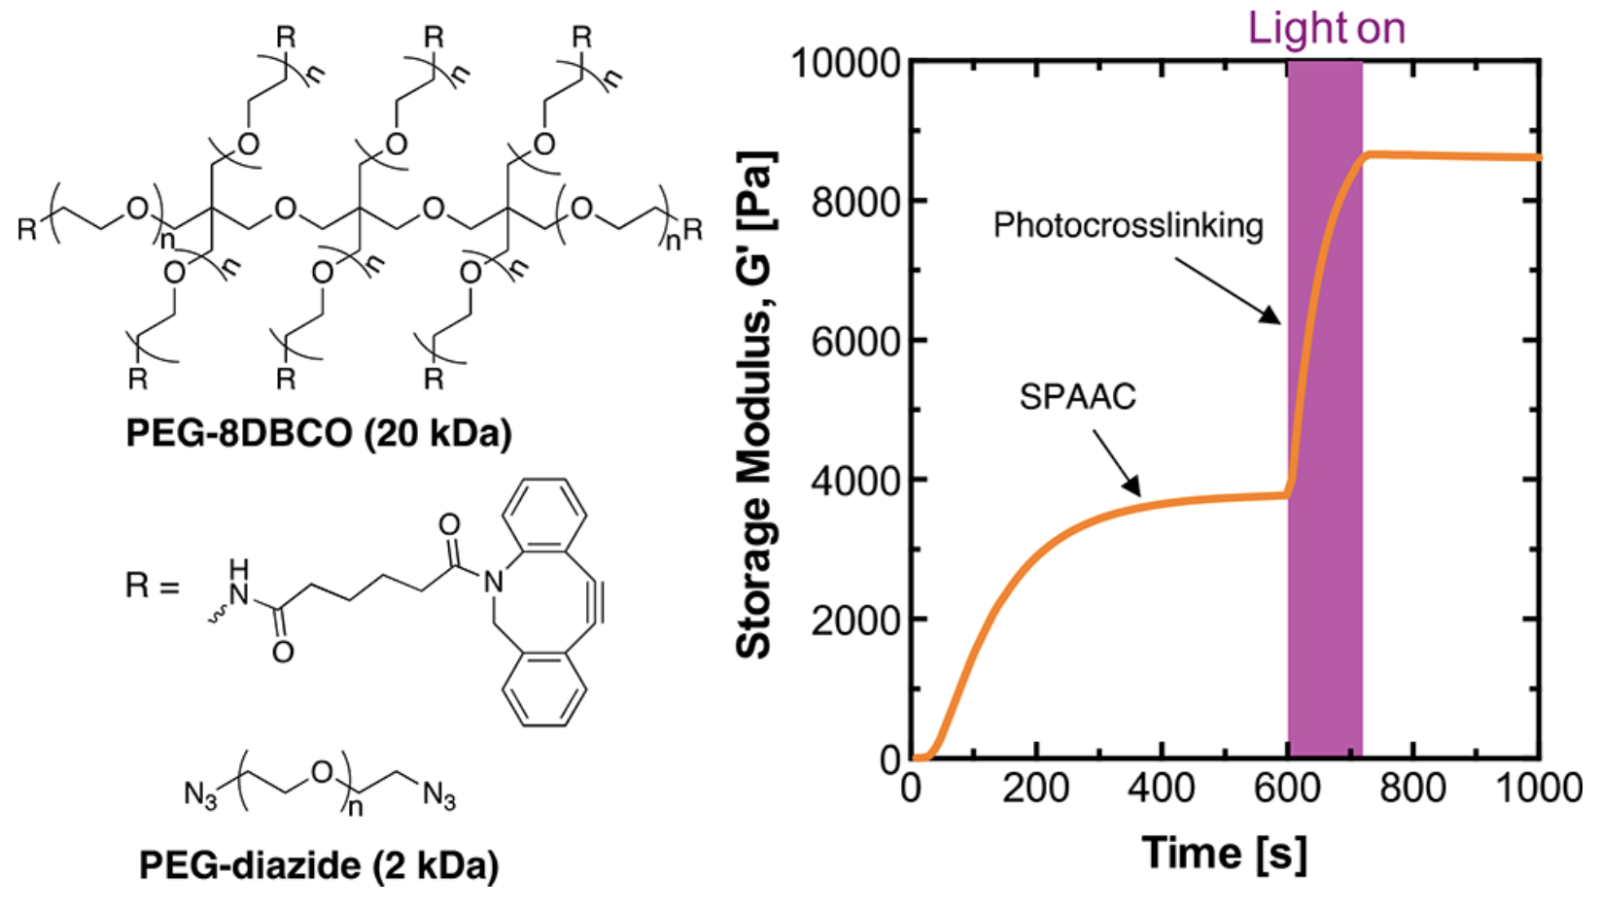 DBCO photopolymerization enables consecutive reactions in a click hydrogel and secondary photostiffening